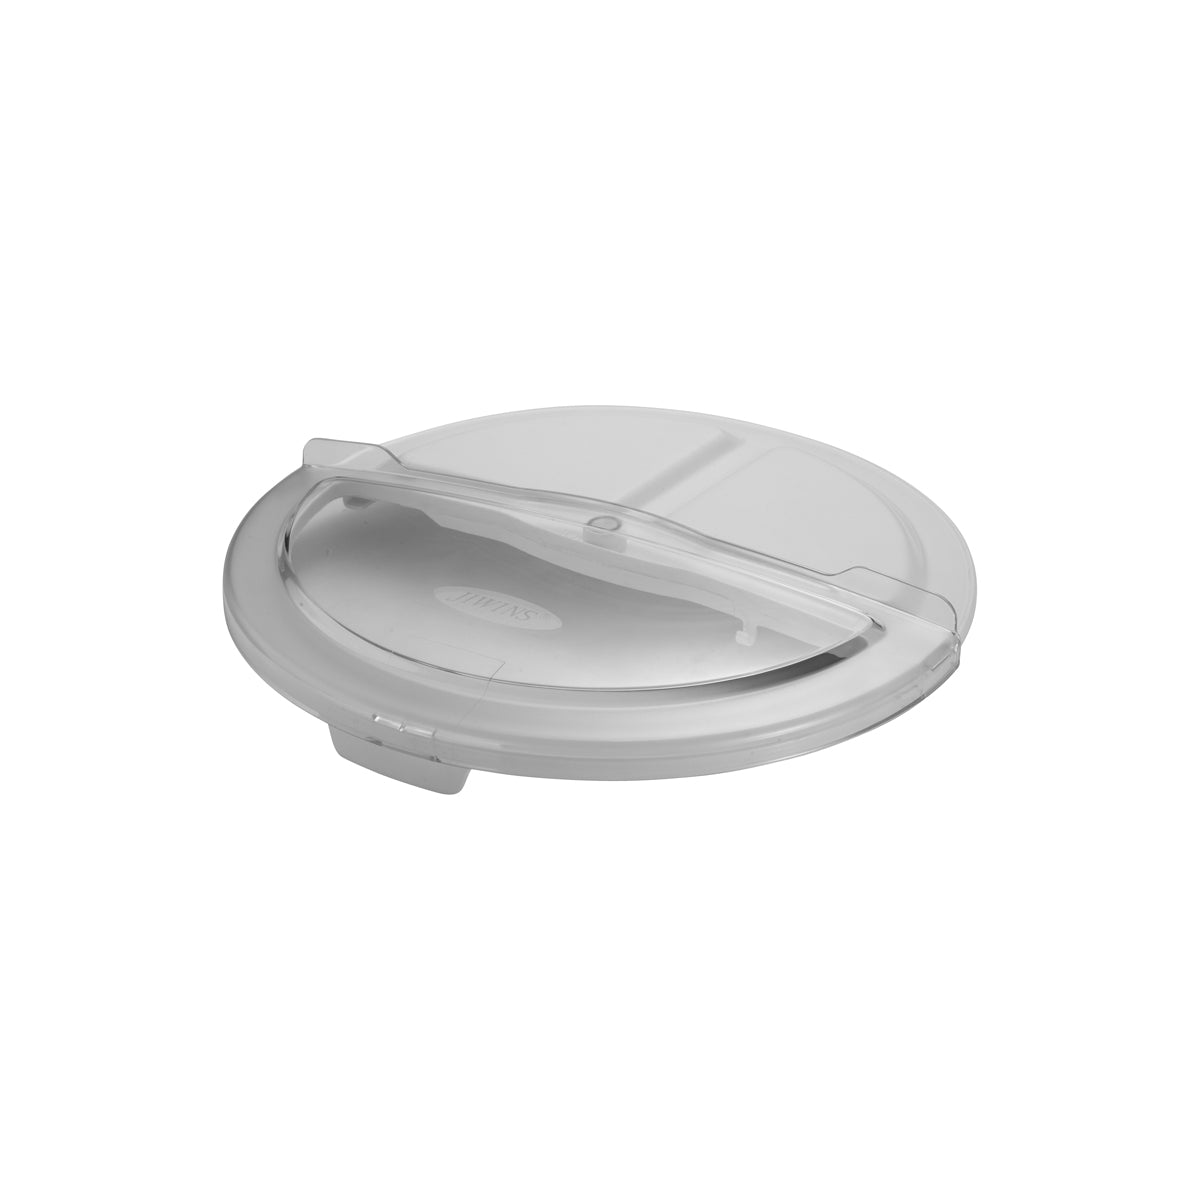 JW-CRCS76 Jiwins Sliding Lid to Suit 75.7Lt Round Ingredient Container Tomkin Australia Hospitality Supplies